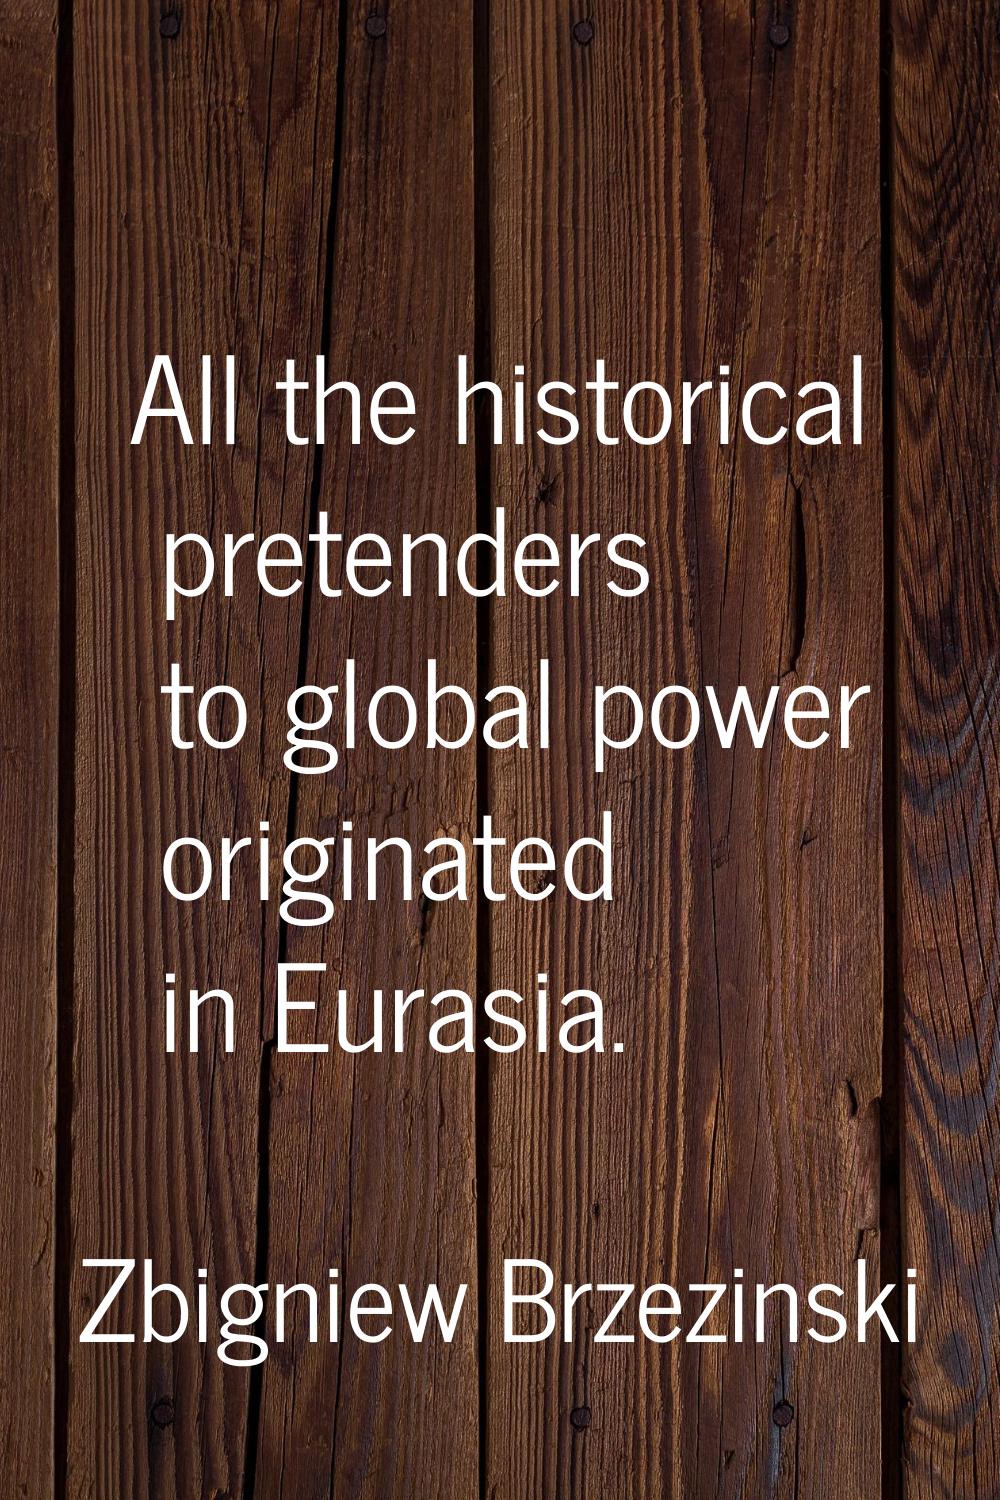 All the historical pretenders to global power originated in Eurasia.